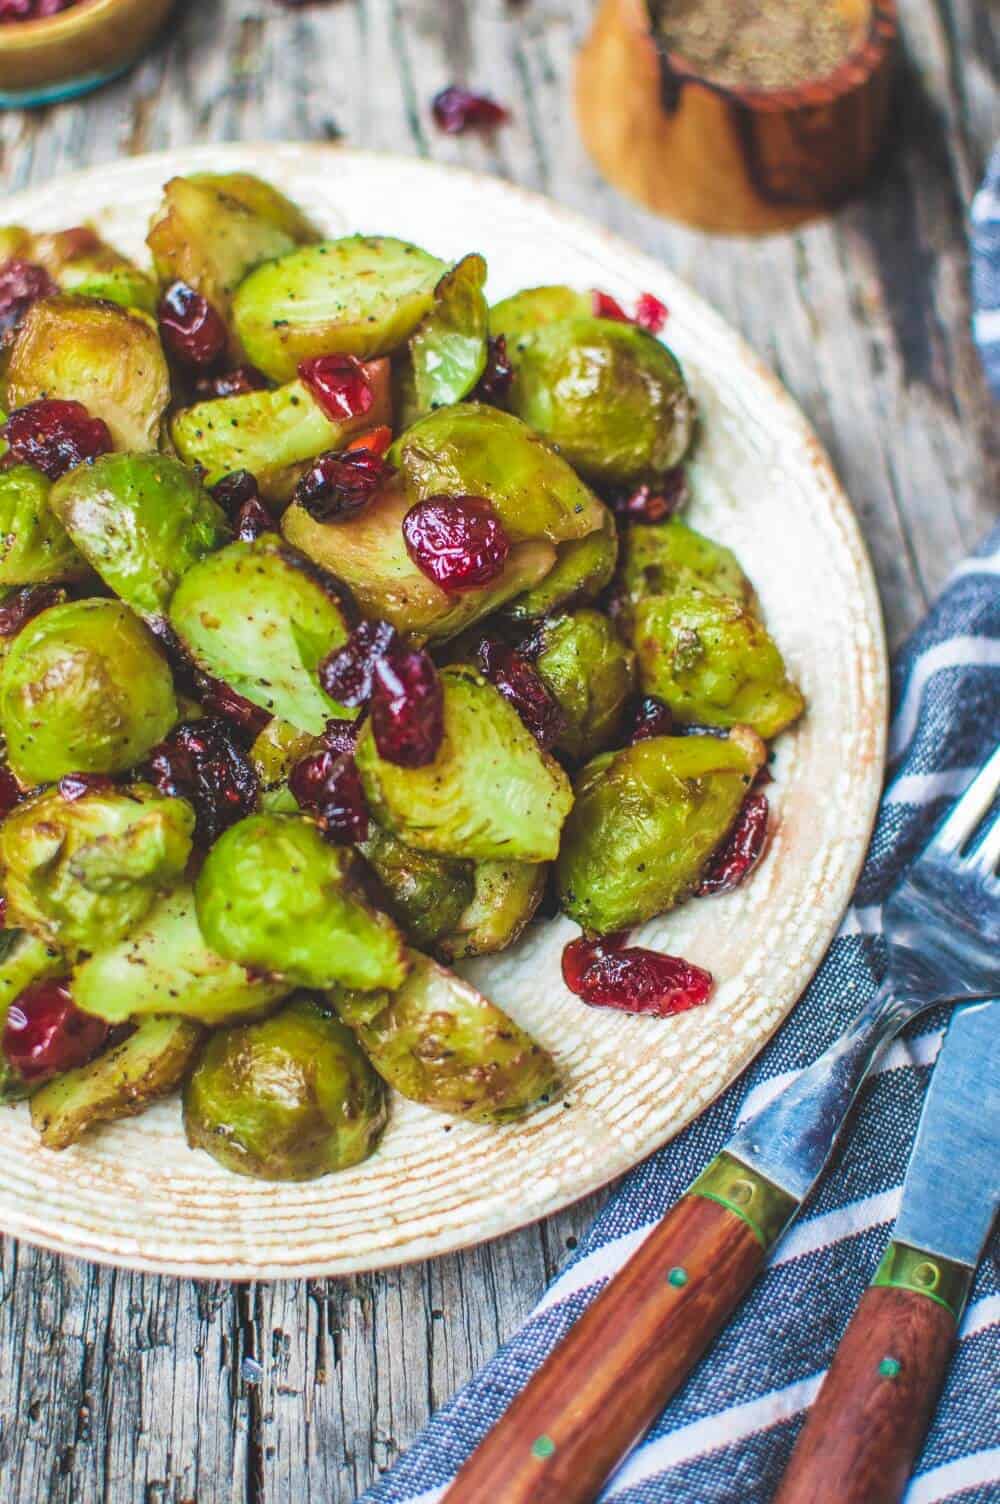 Roasted brussels sprouts mixed with dried cranberries on a white plate.